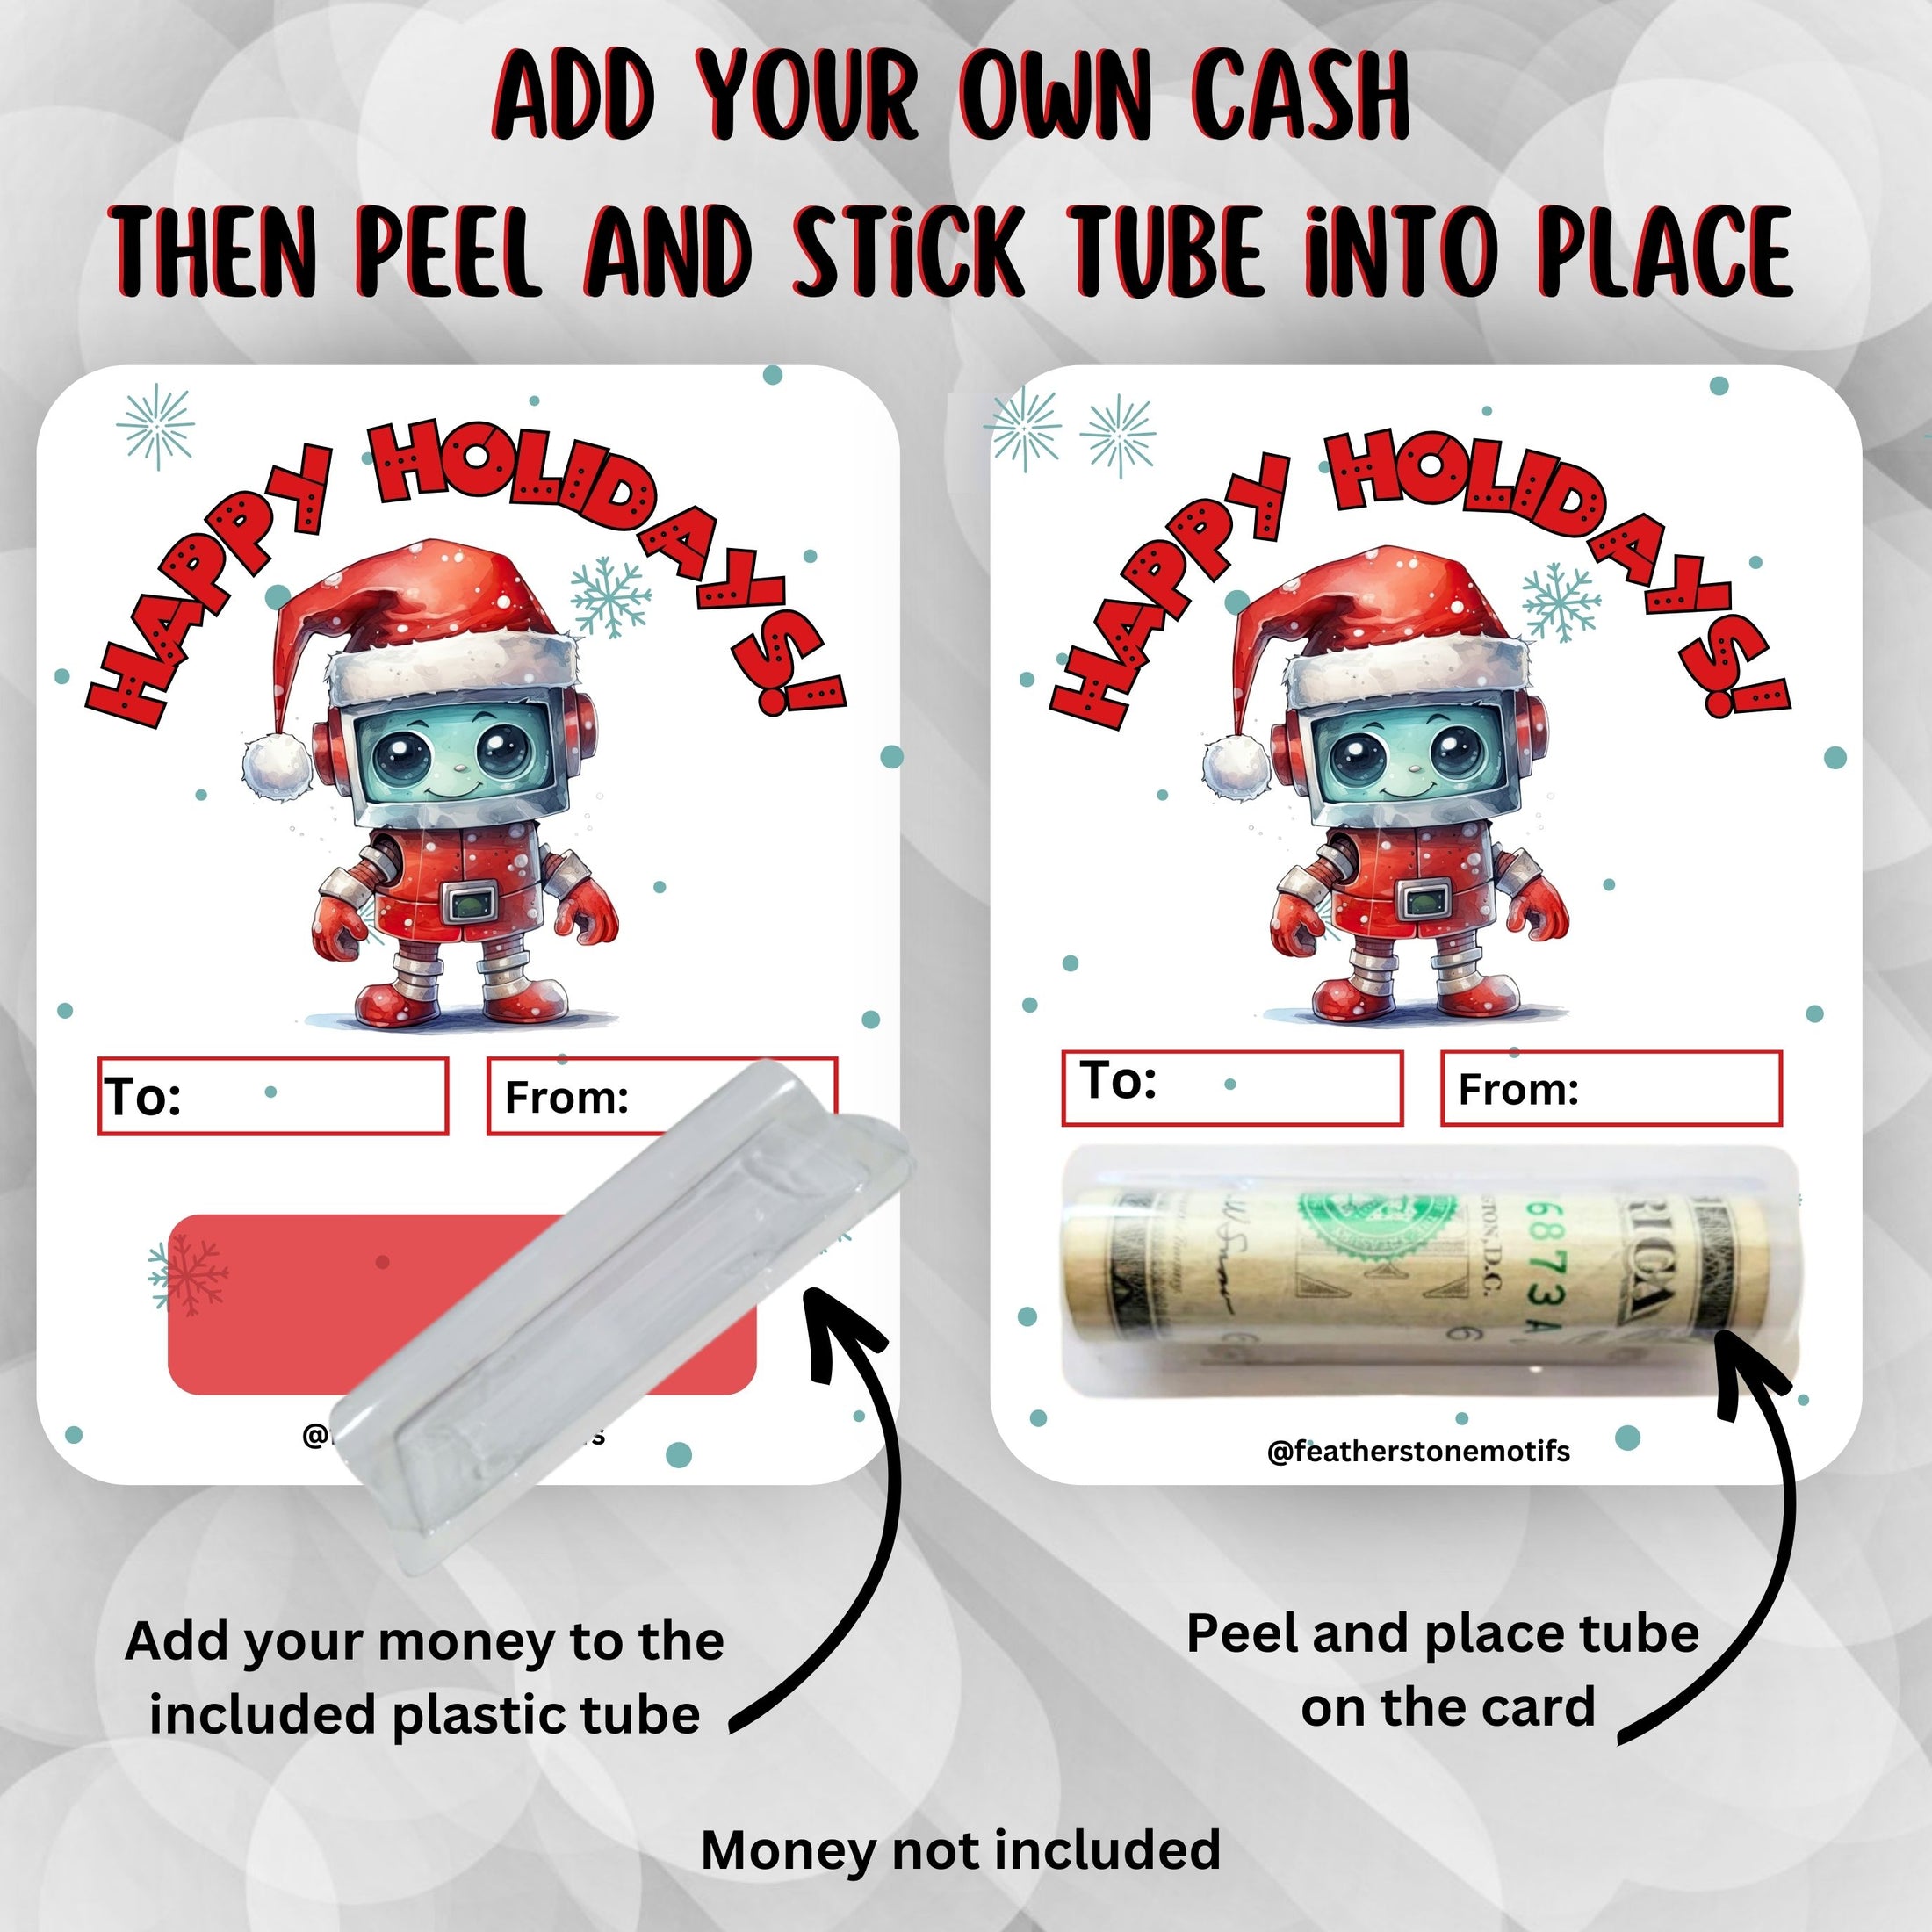 This image shows how to attached the money tube to the Robot money card.